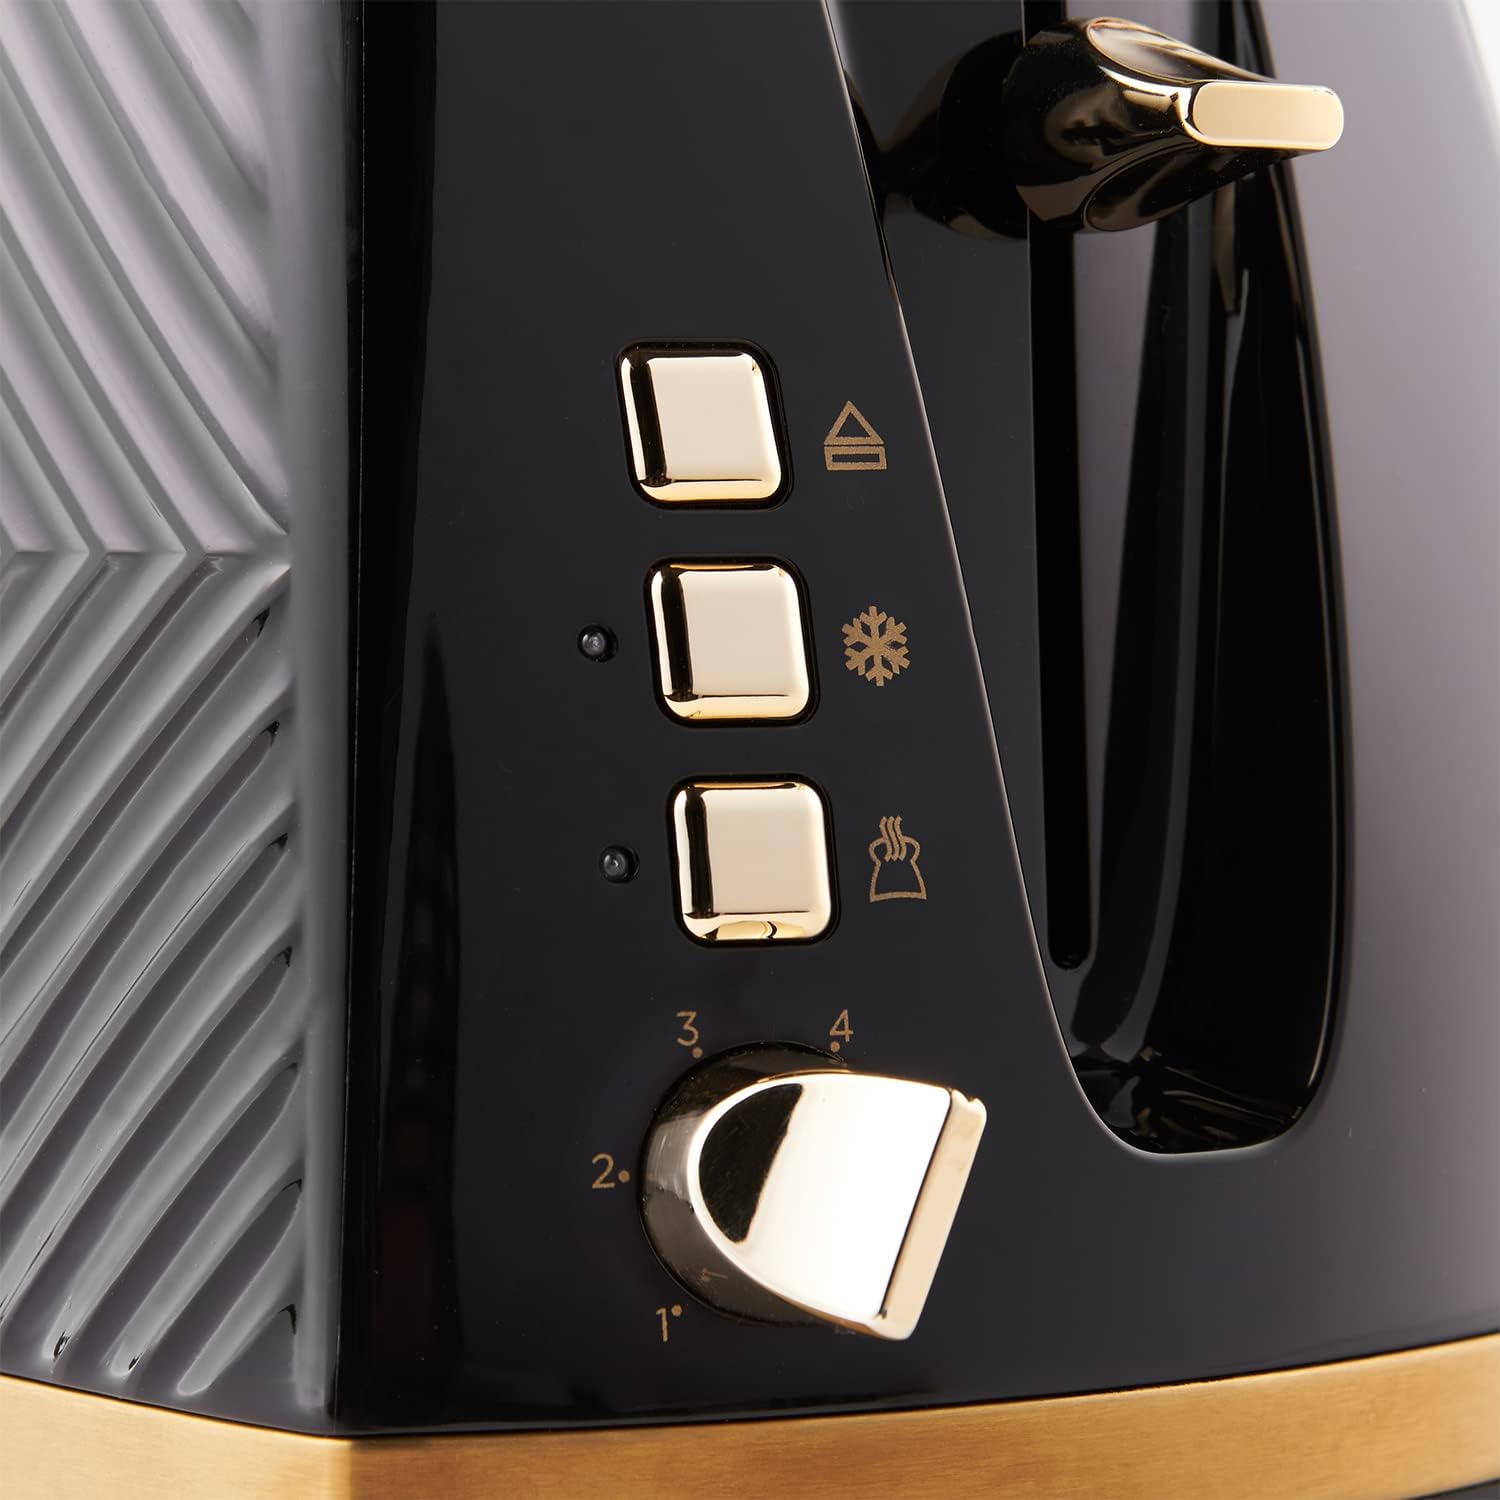 Russell Hobbs Groove 2 Slice Toaster (High Lift, Extra Wide Slots, 6 Browning levels, Frozen/Cancel/Reheat function - Illuminated buttons, Removable crumb tray, 850W, Black, Brushed gold accents)26390